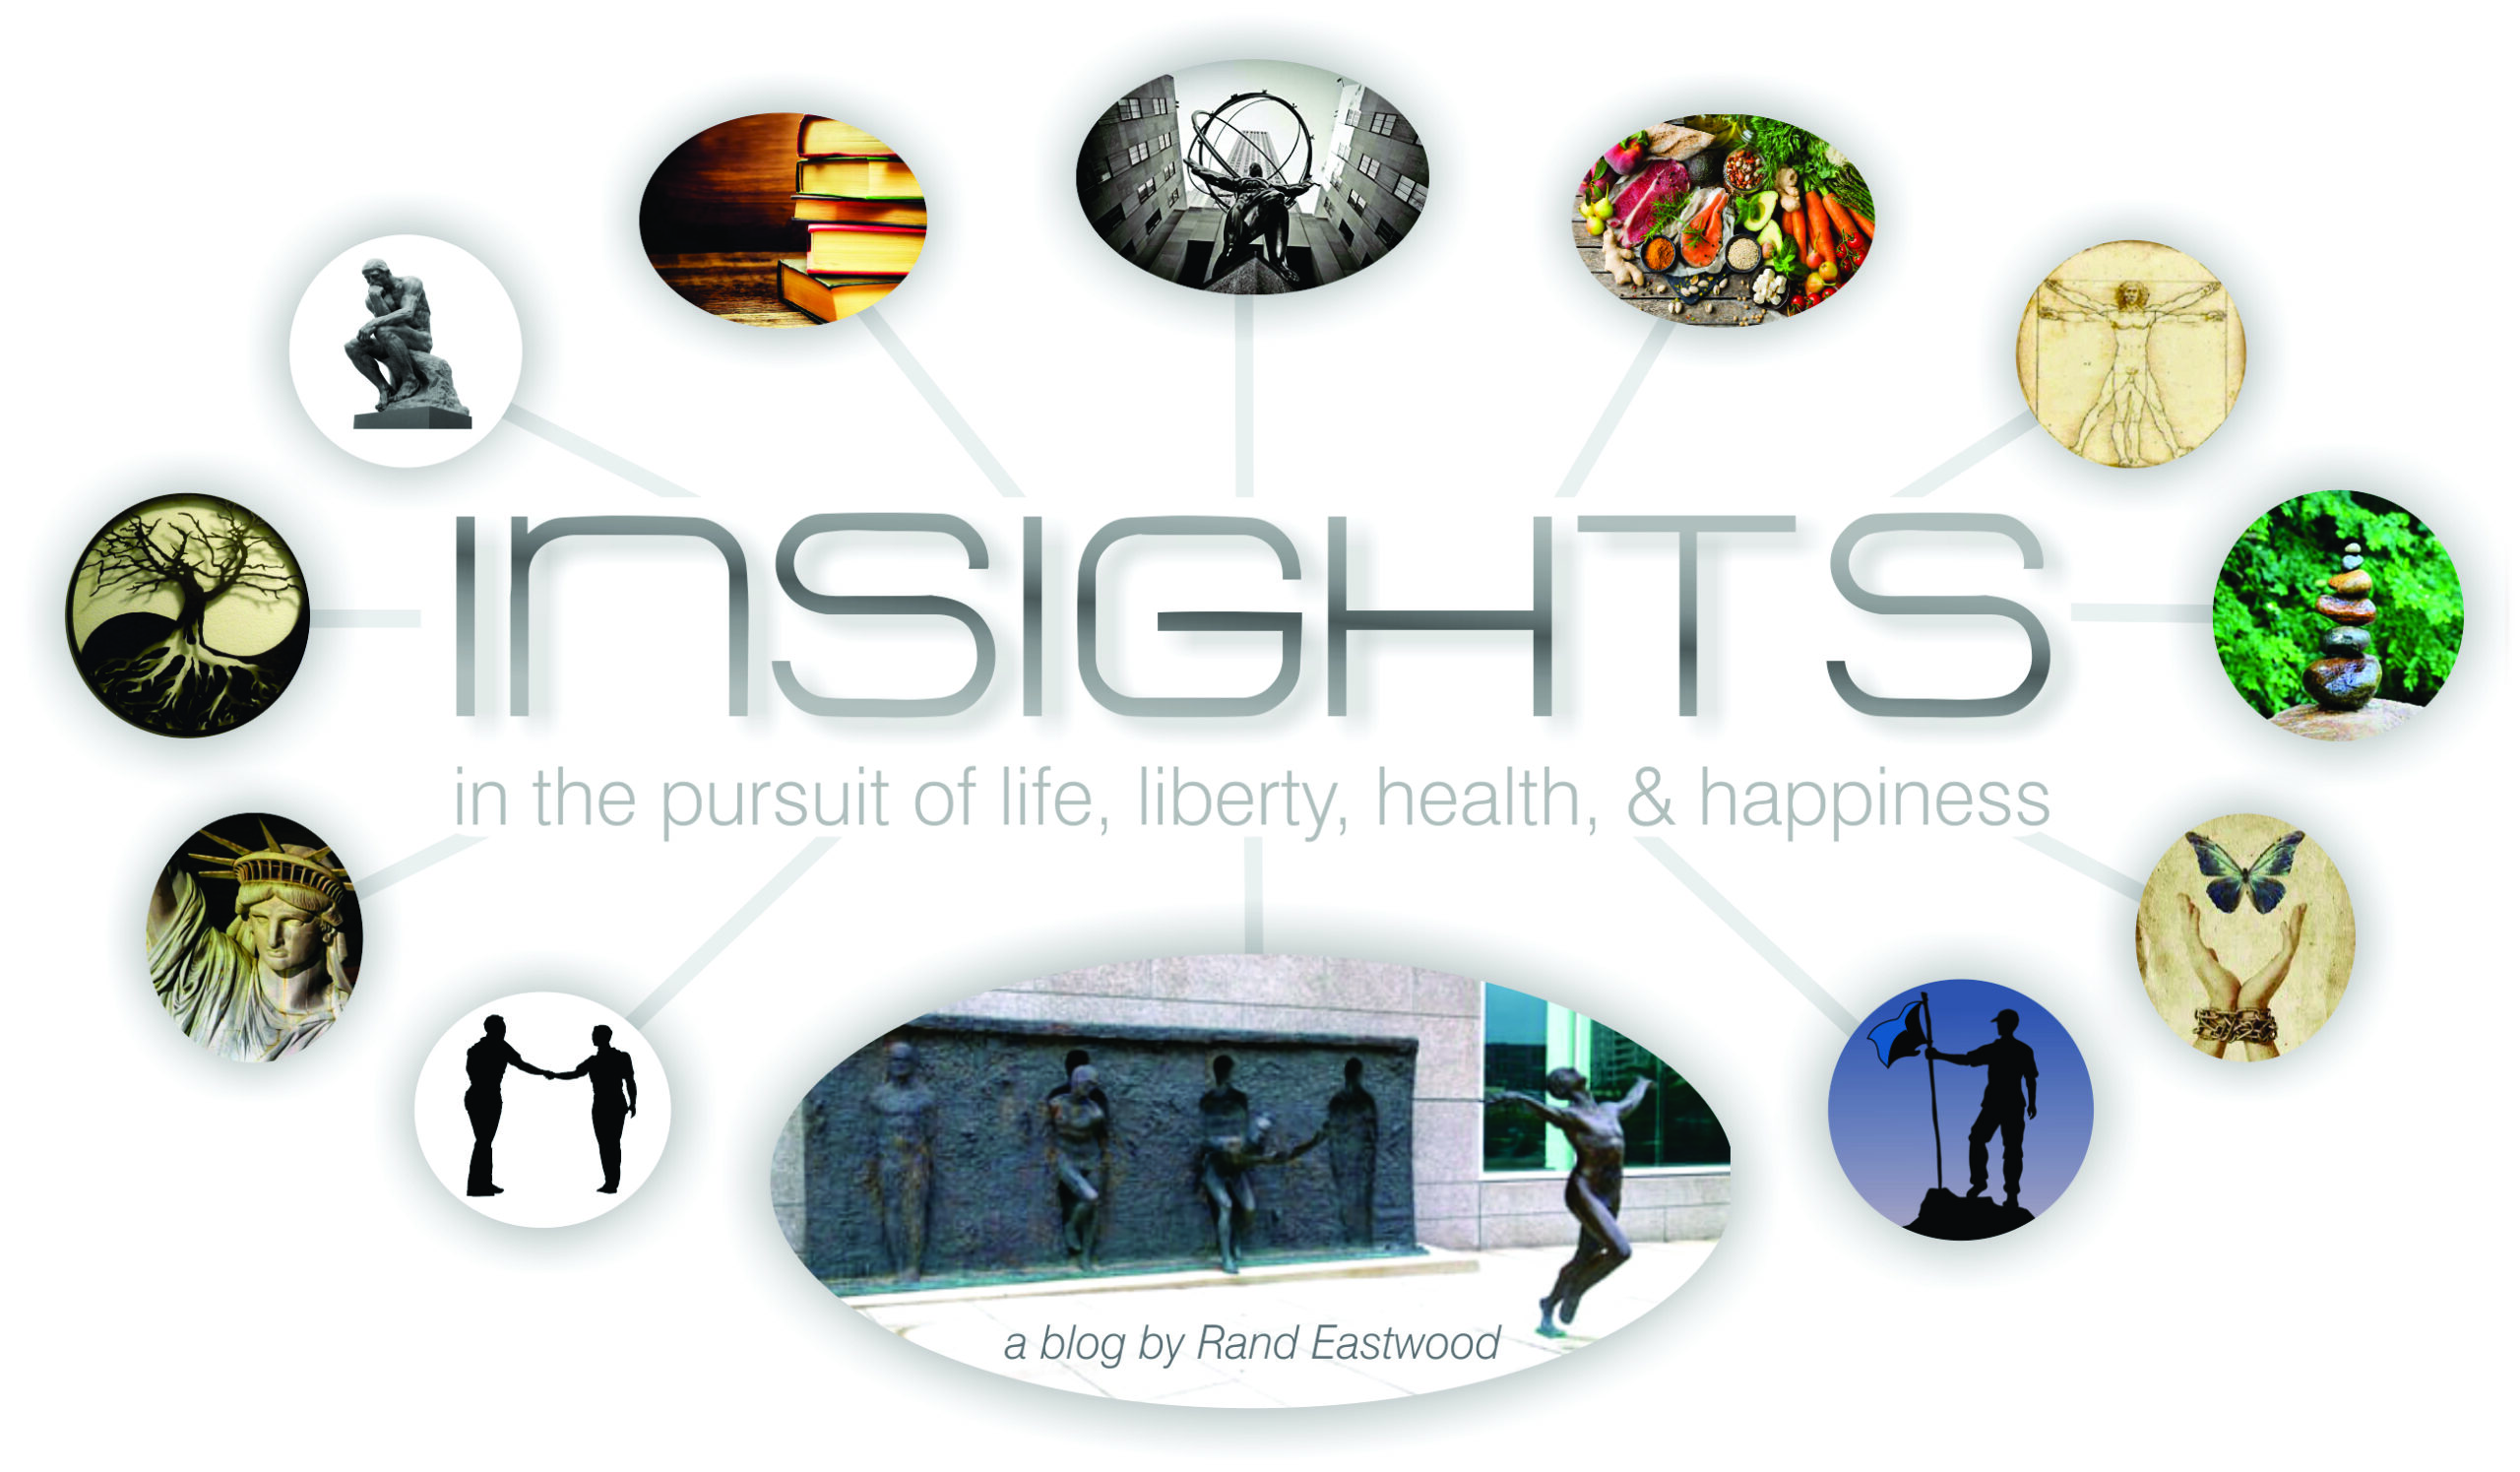 in the pursuit of life, liberty, health, & happiness